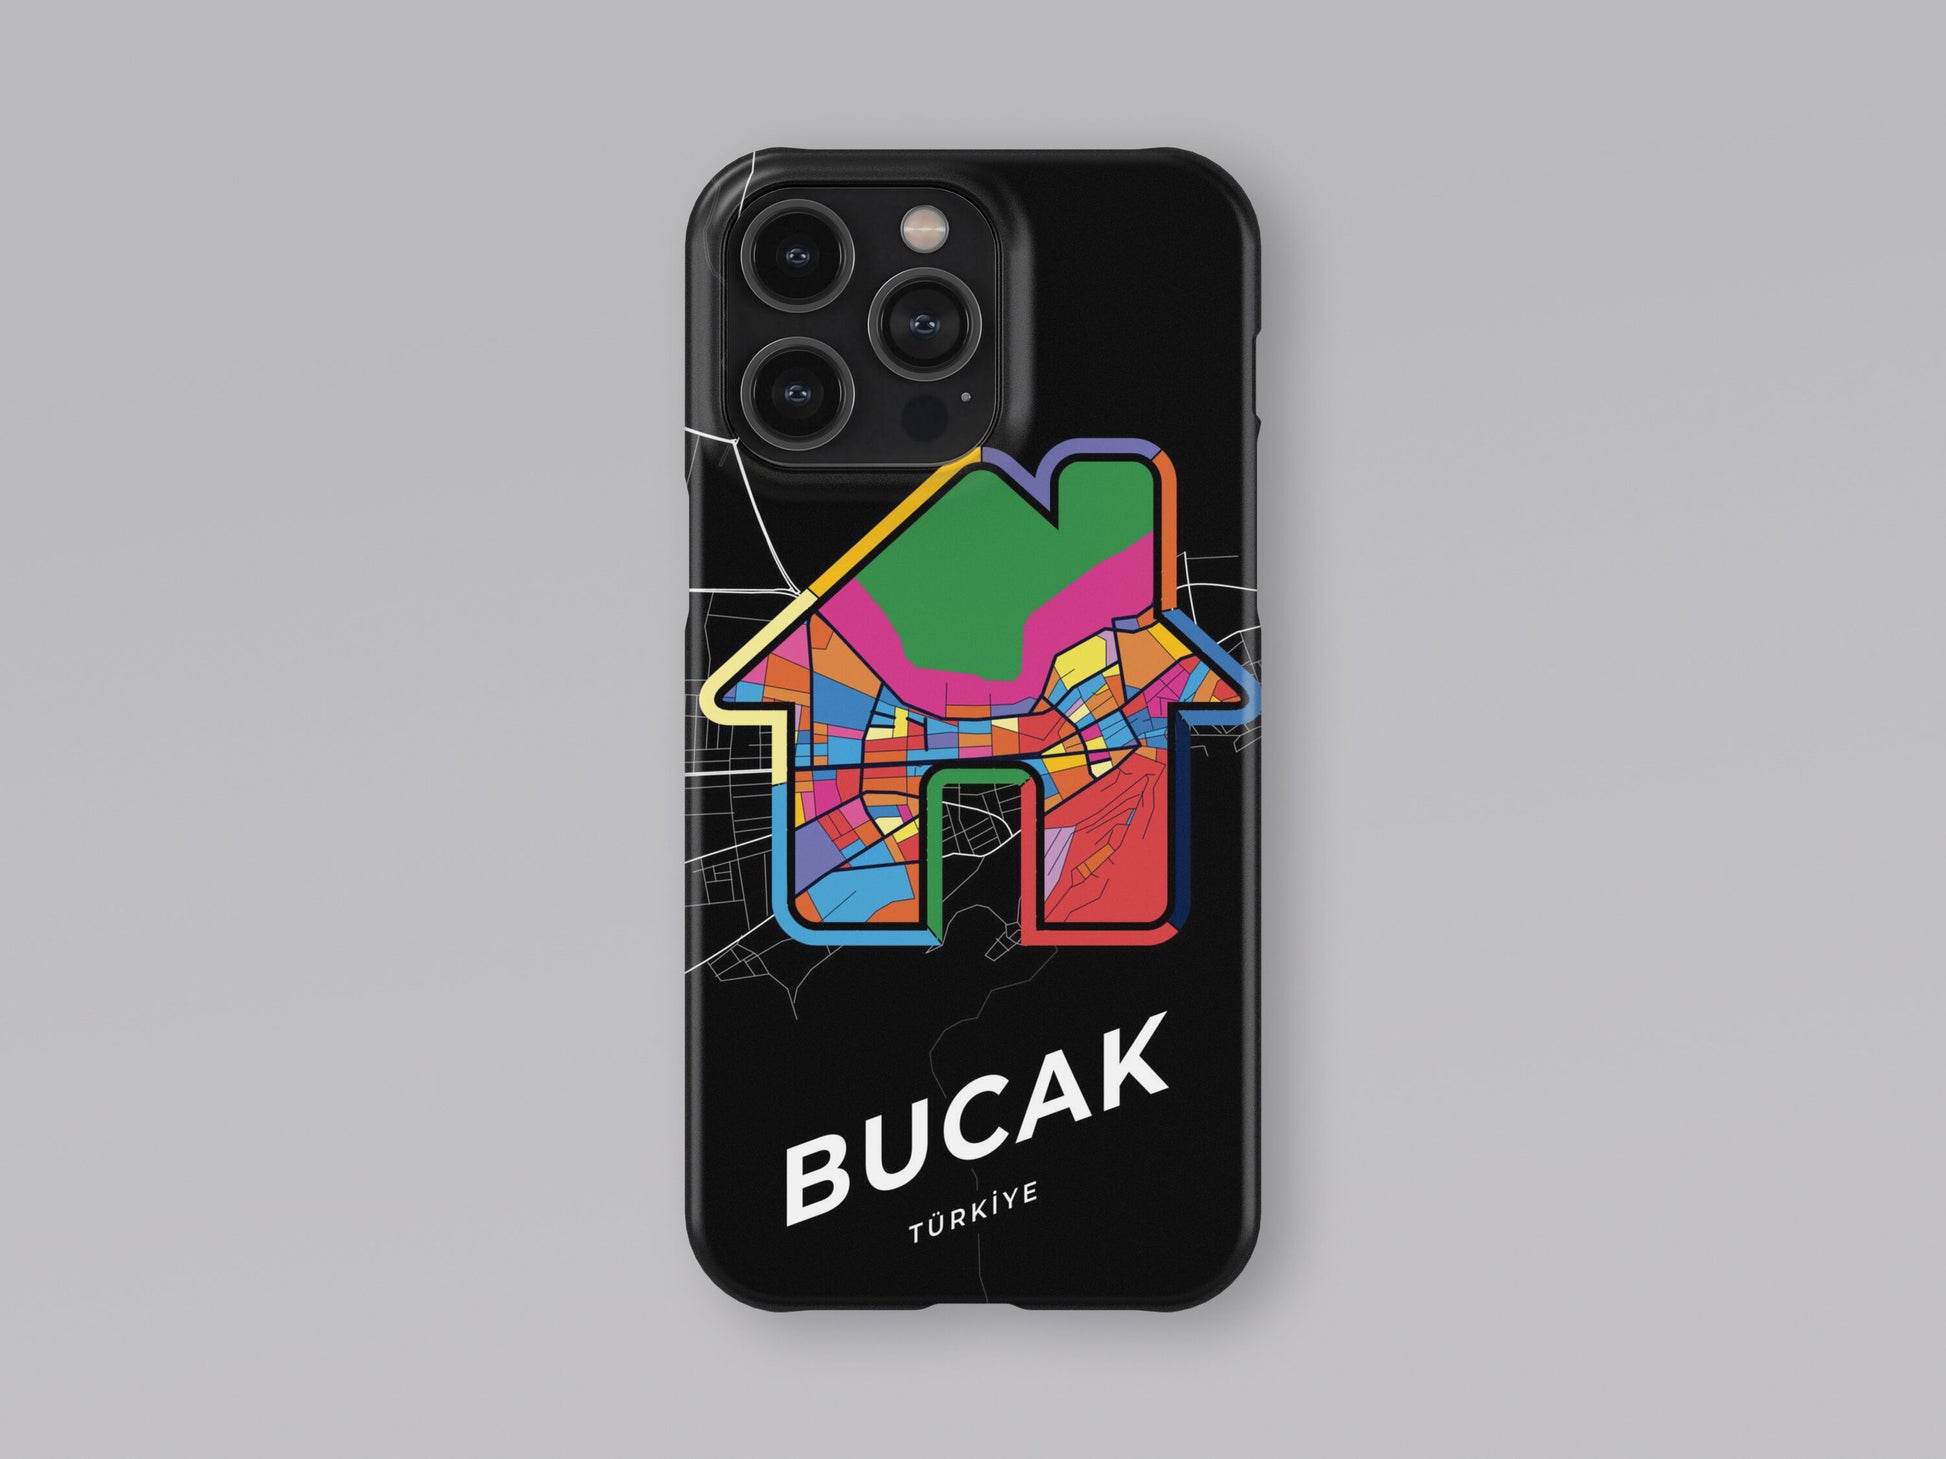 Bucak Turkey slim phone case with colorful icon. Birthday, wedding or housewarming gift. Couple match cases. 3